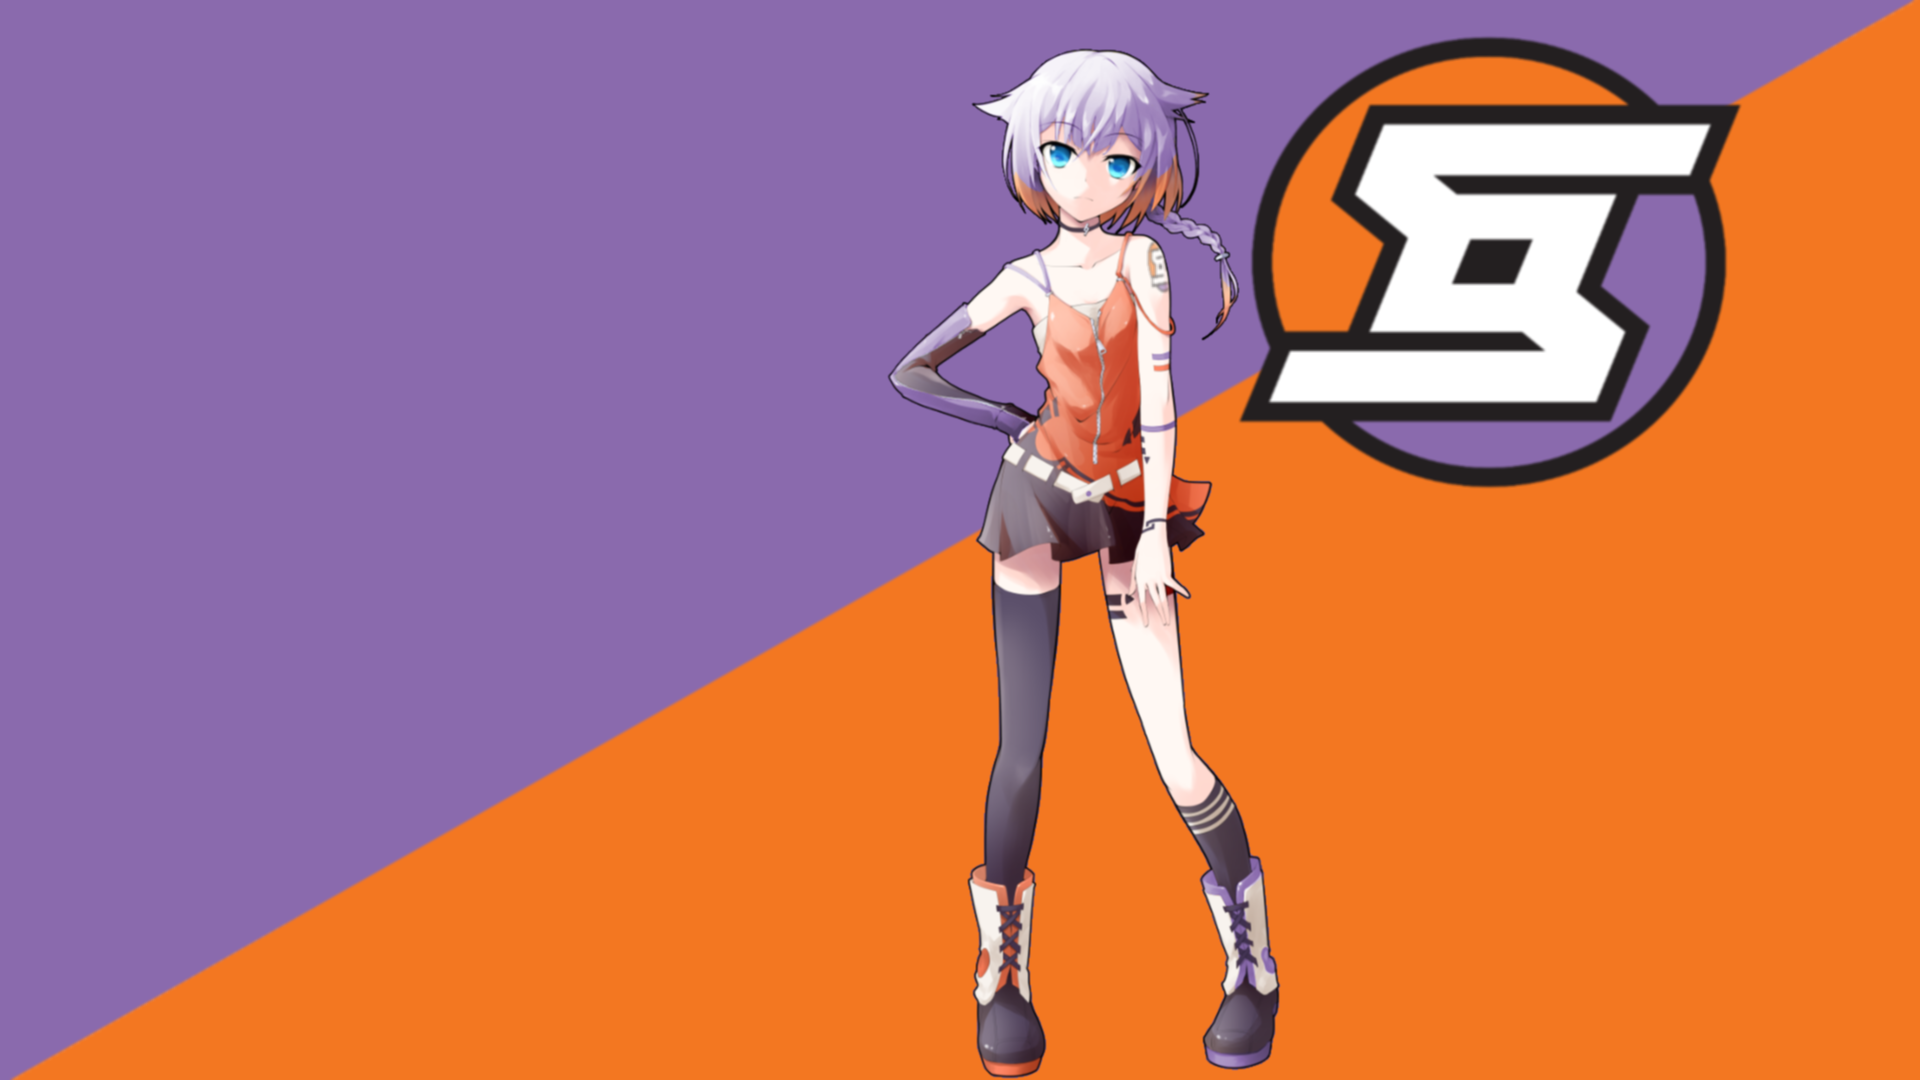 Warsow First Person Shooter Logo Anime Girls Arena Shooter 1920x1080